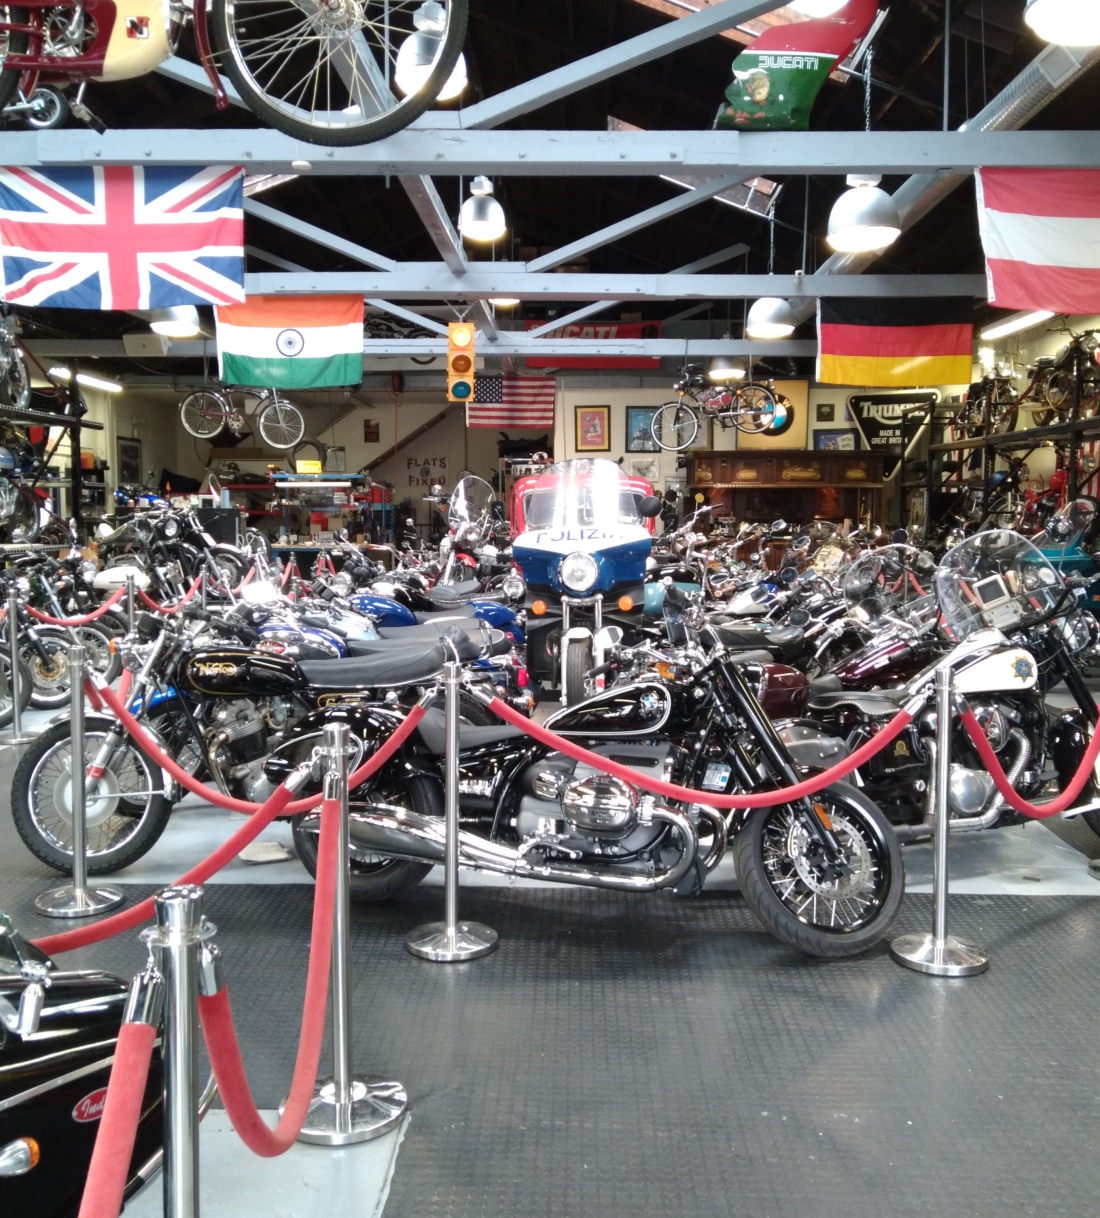 Billy Joel's Motorcycle Museum right next to the Bahr Gallery